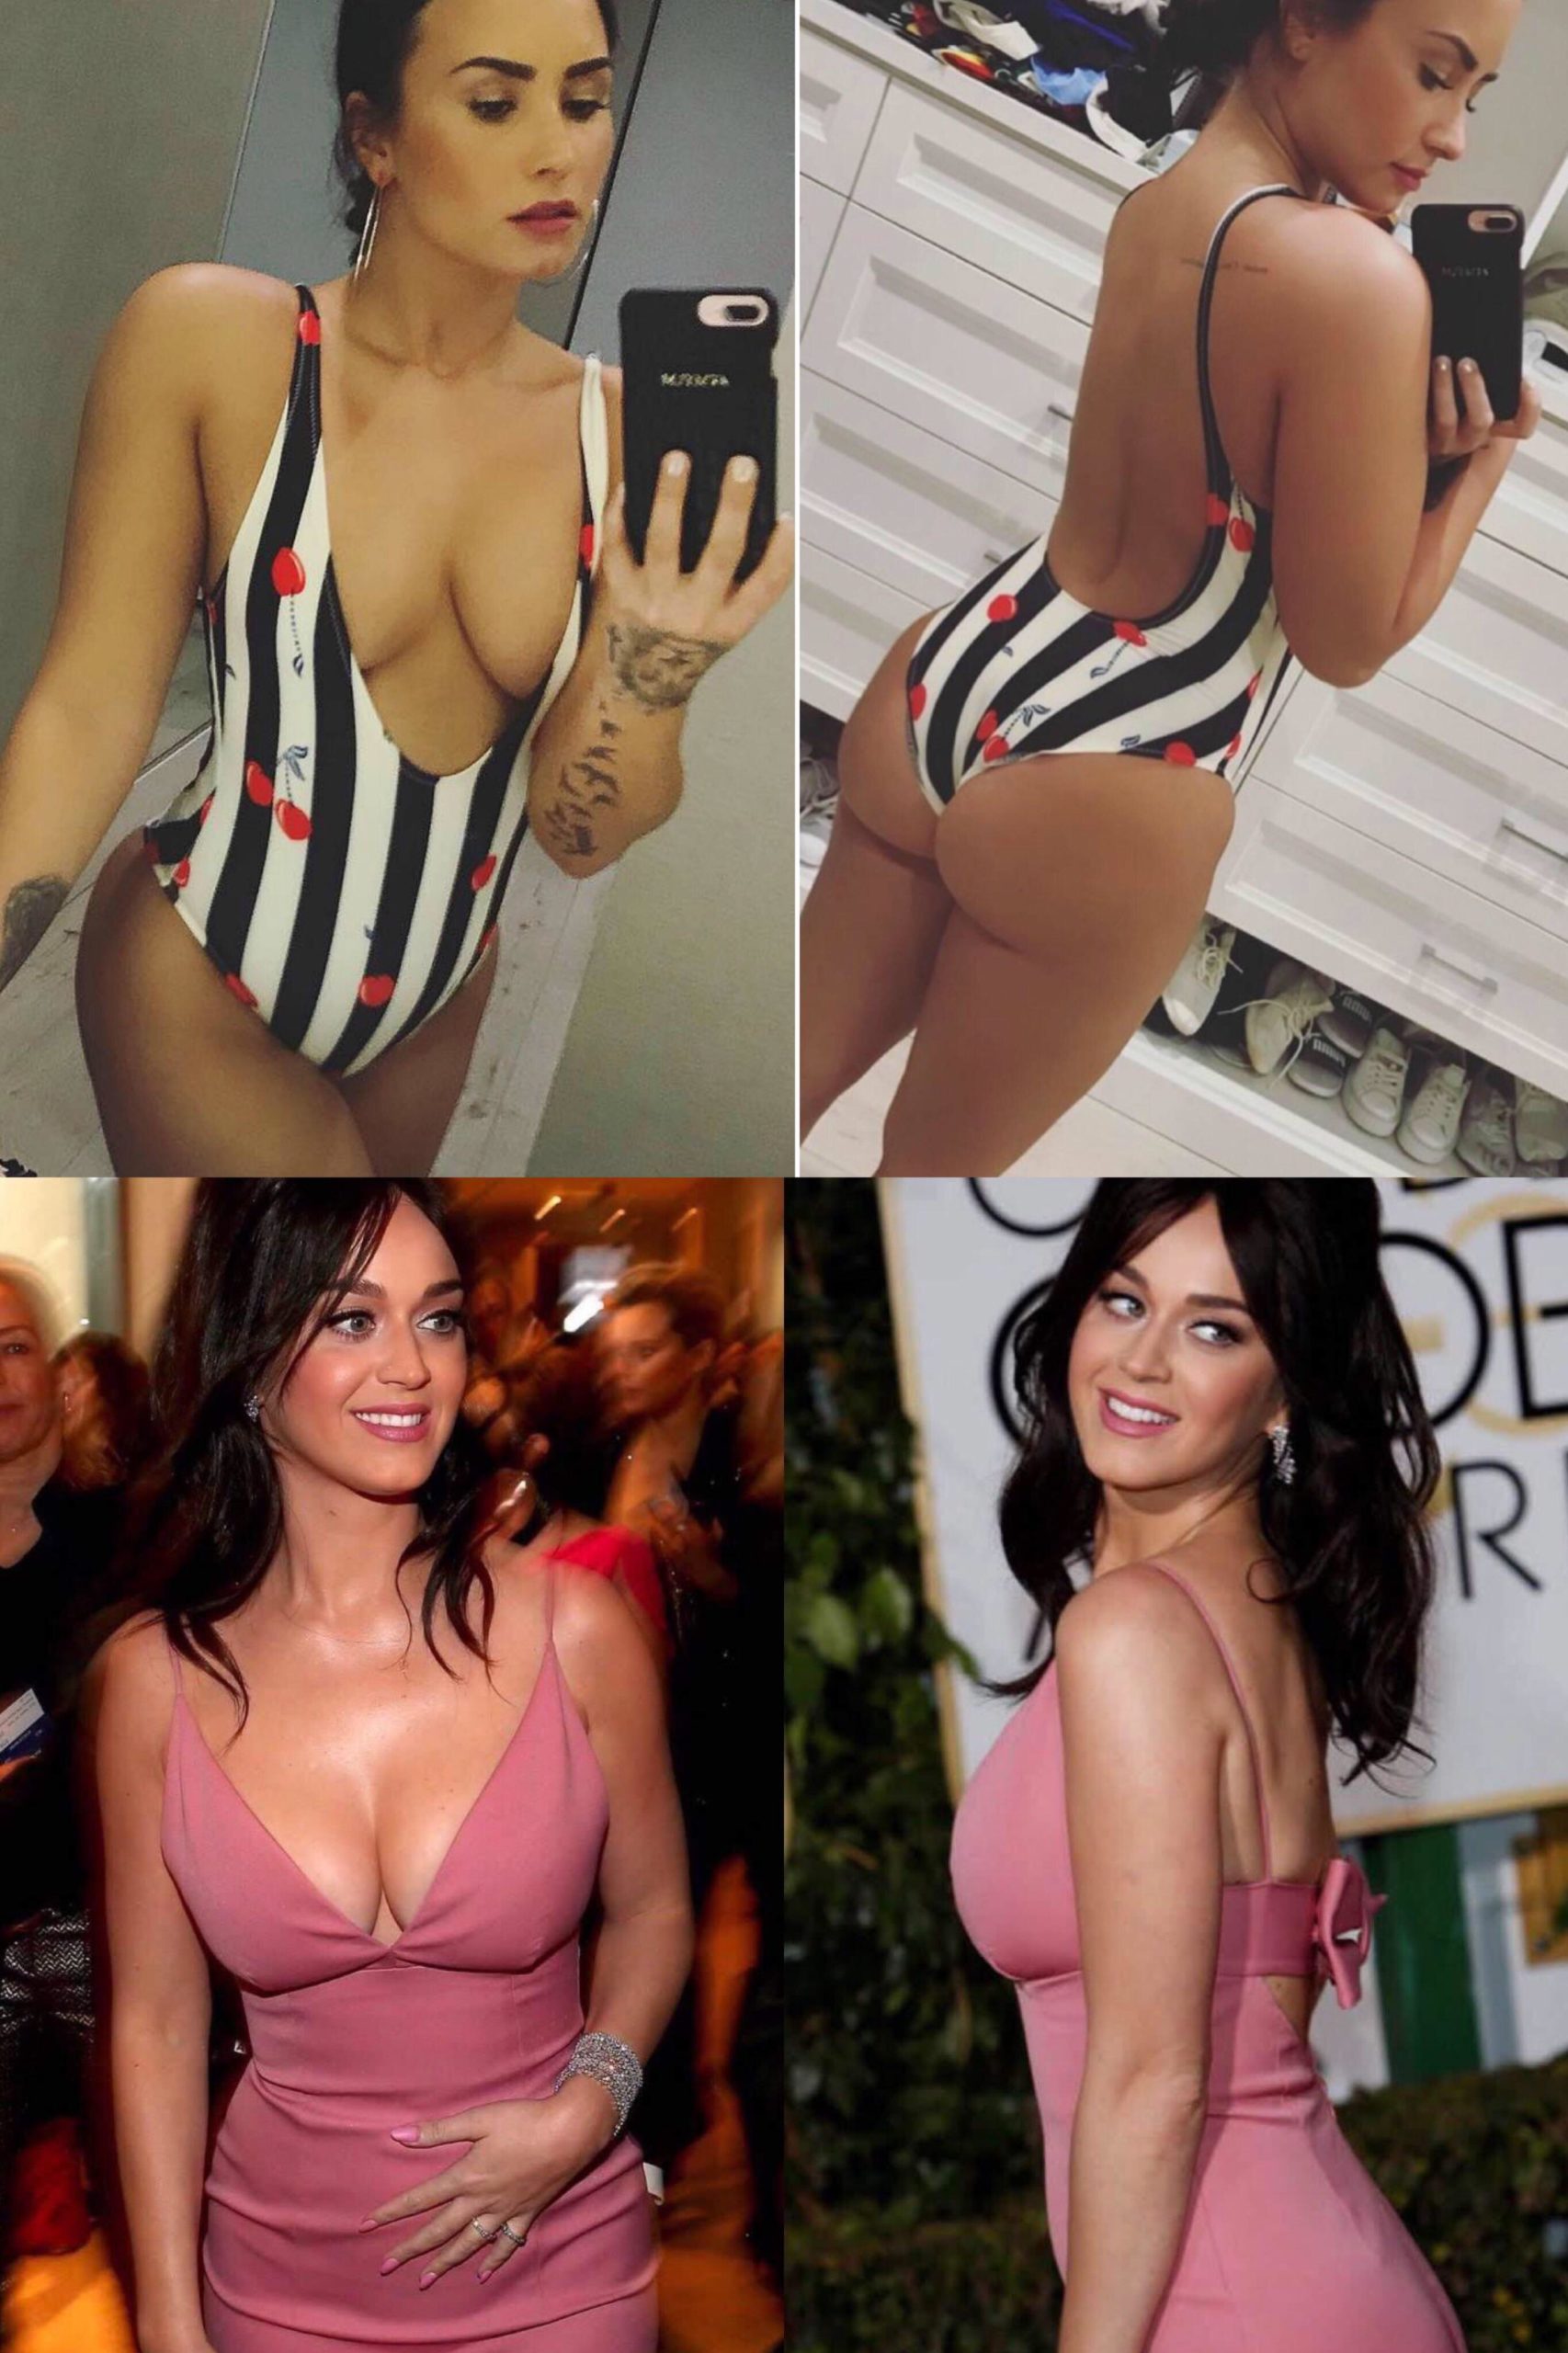 Demi Lovato or Katy Perry. Take your pick.